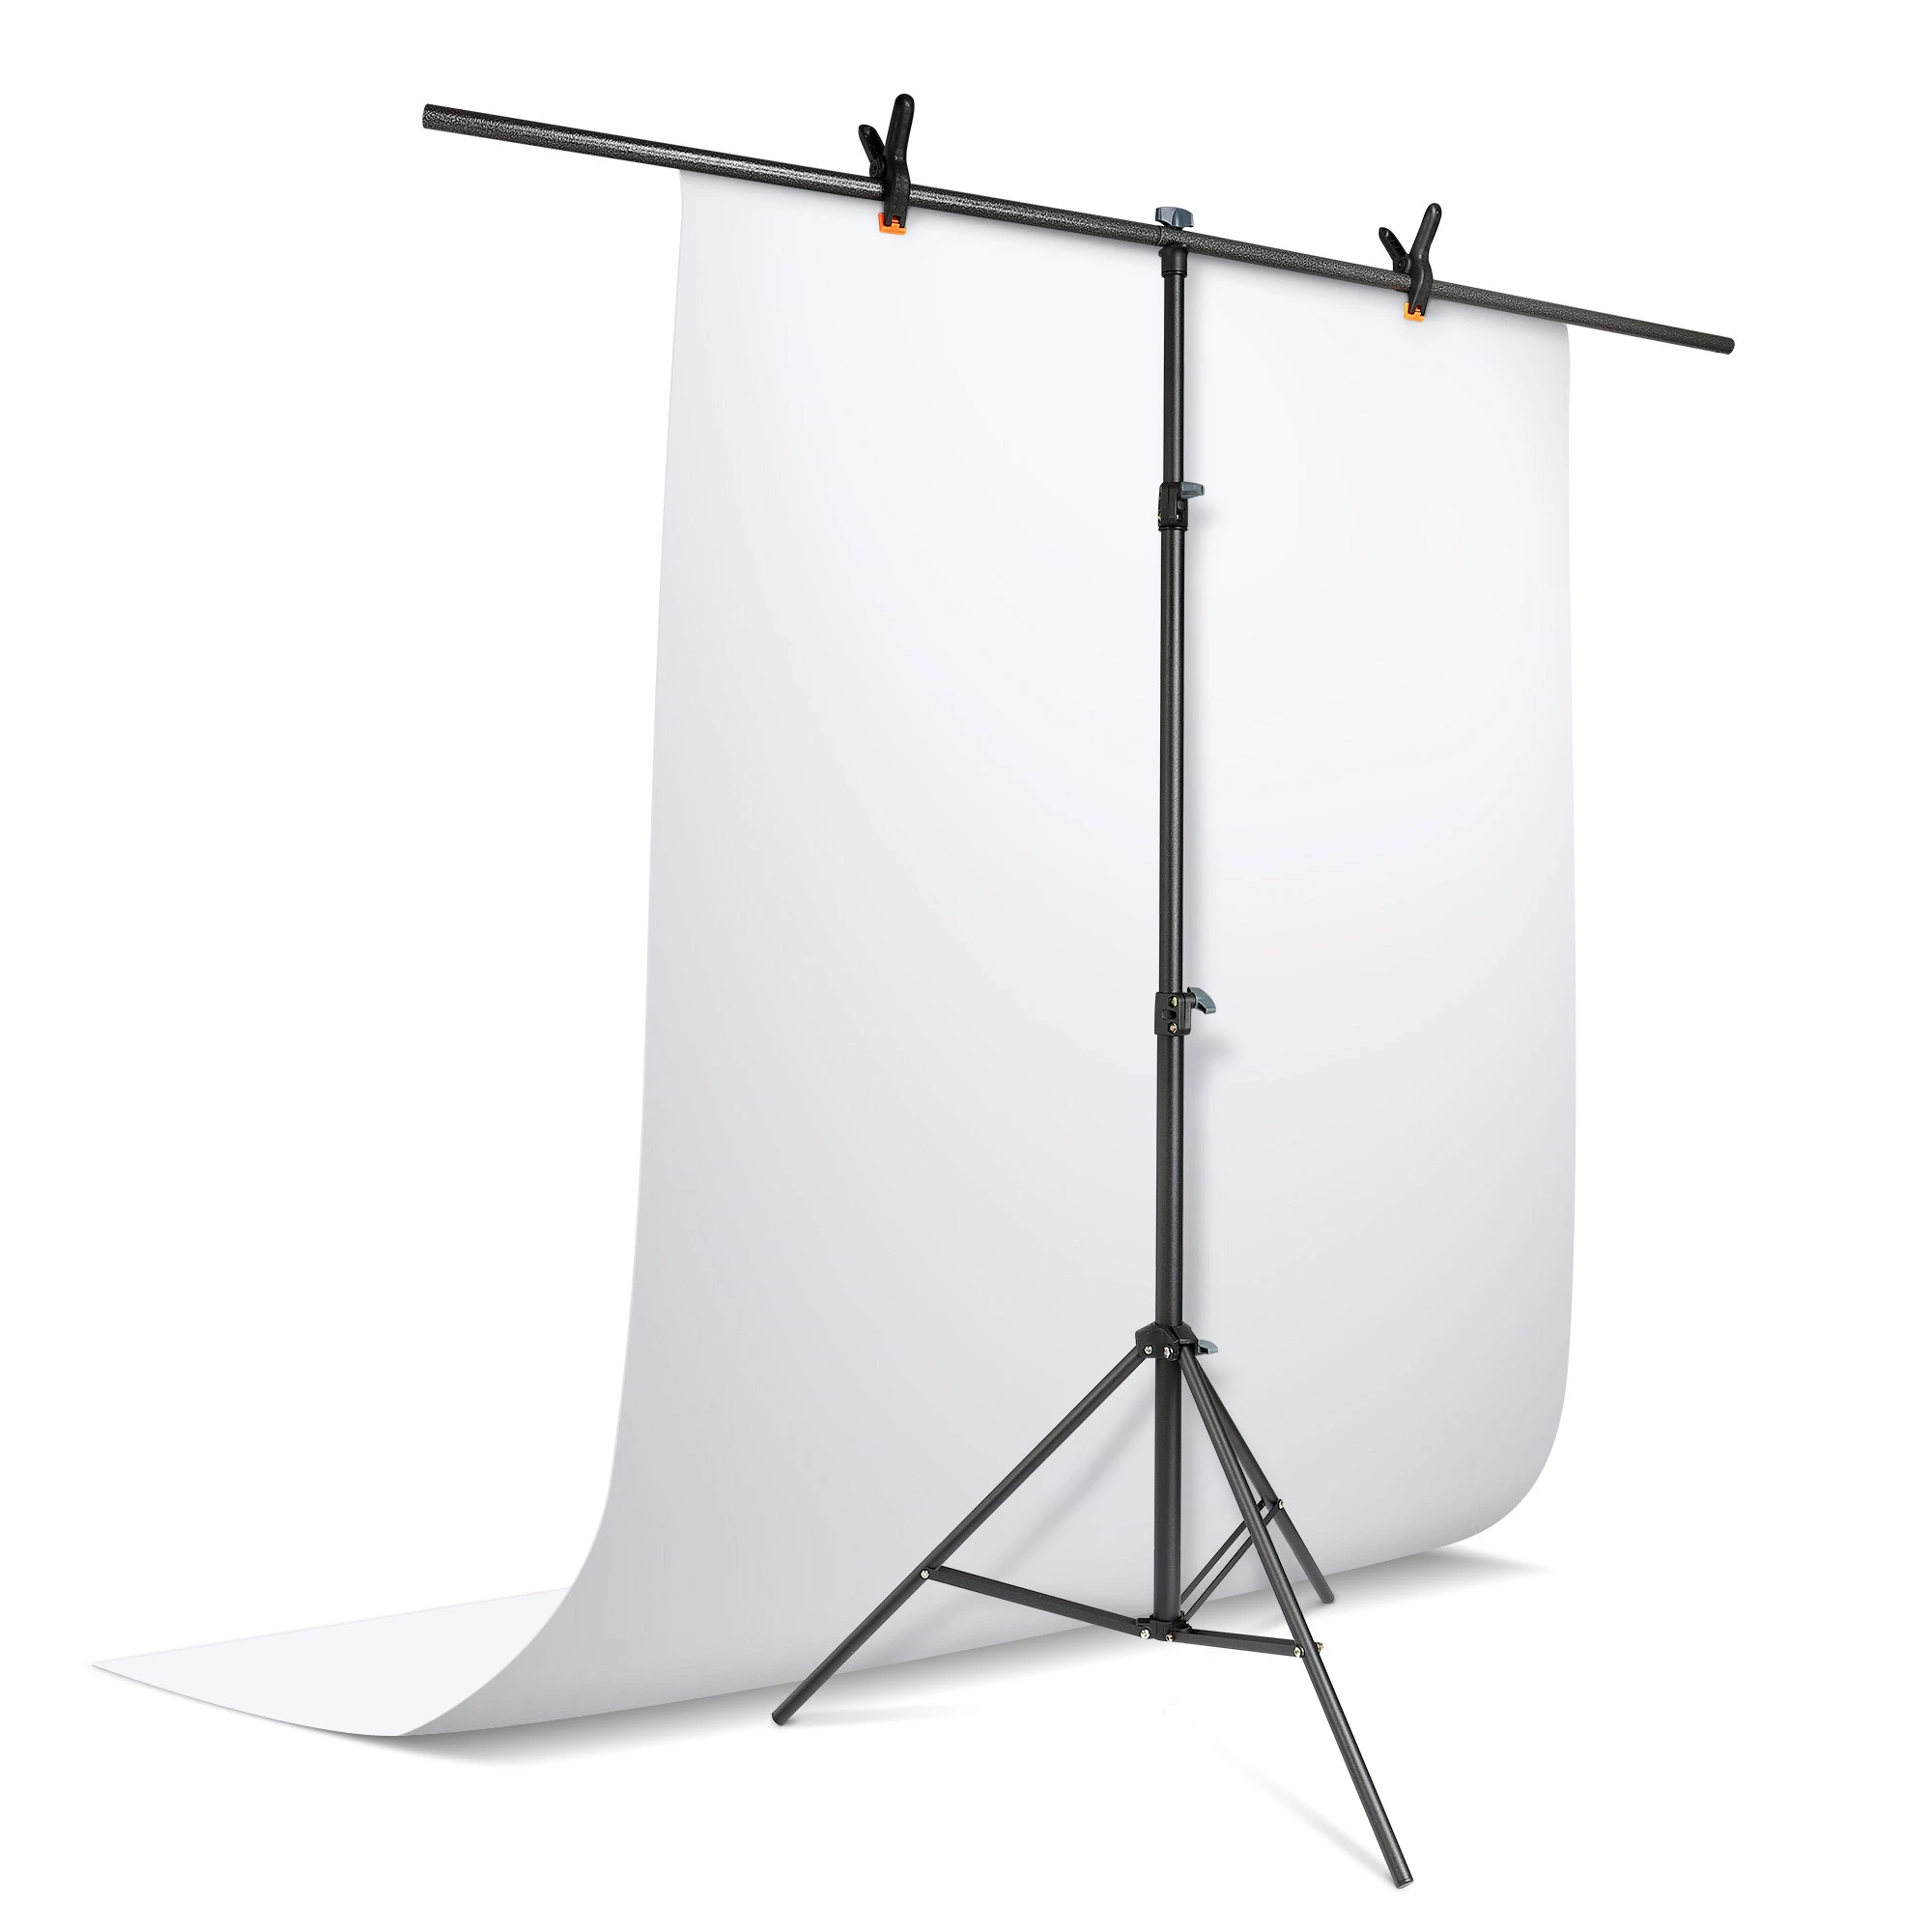 background stand support adjustable small background led stand light studio backdrop photography standing background photo